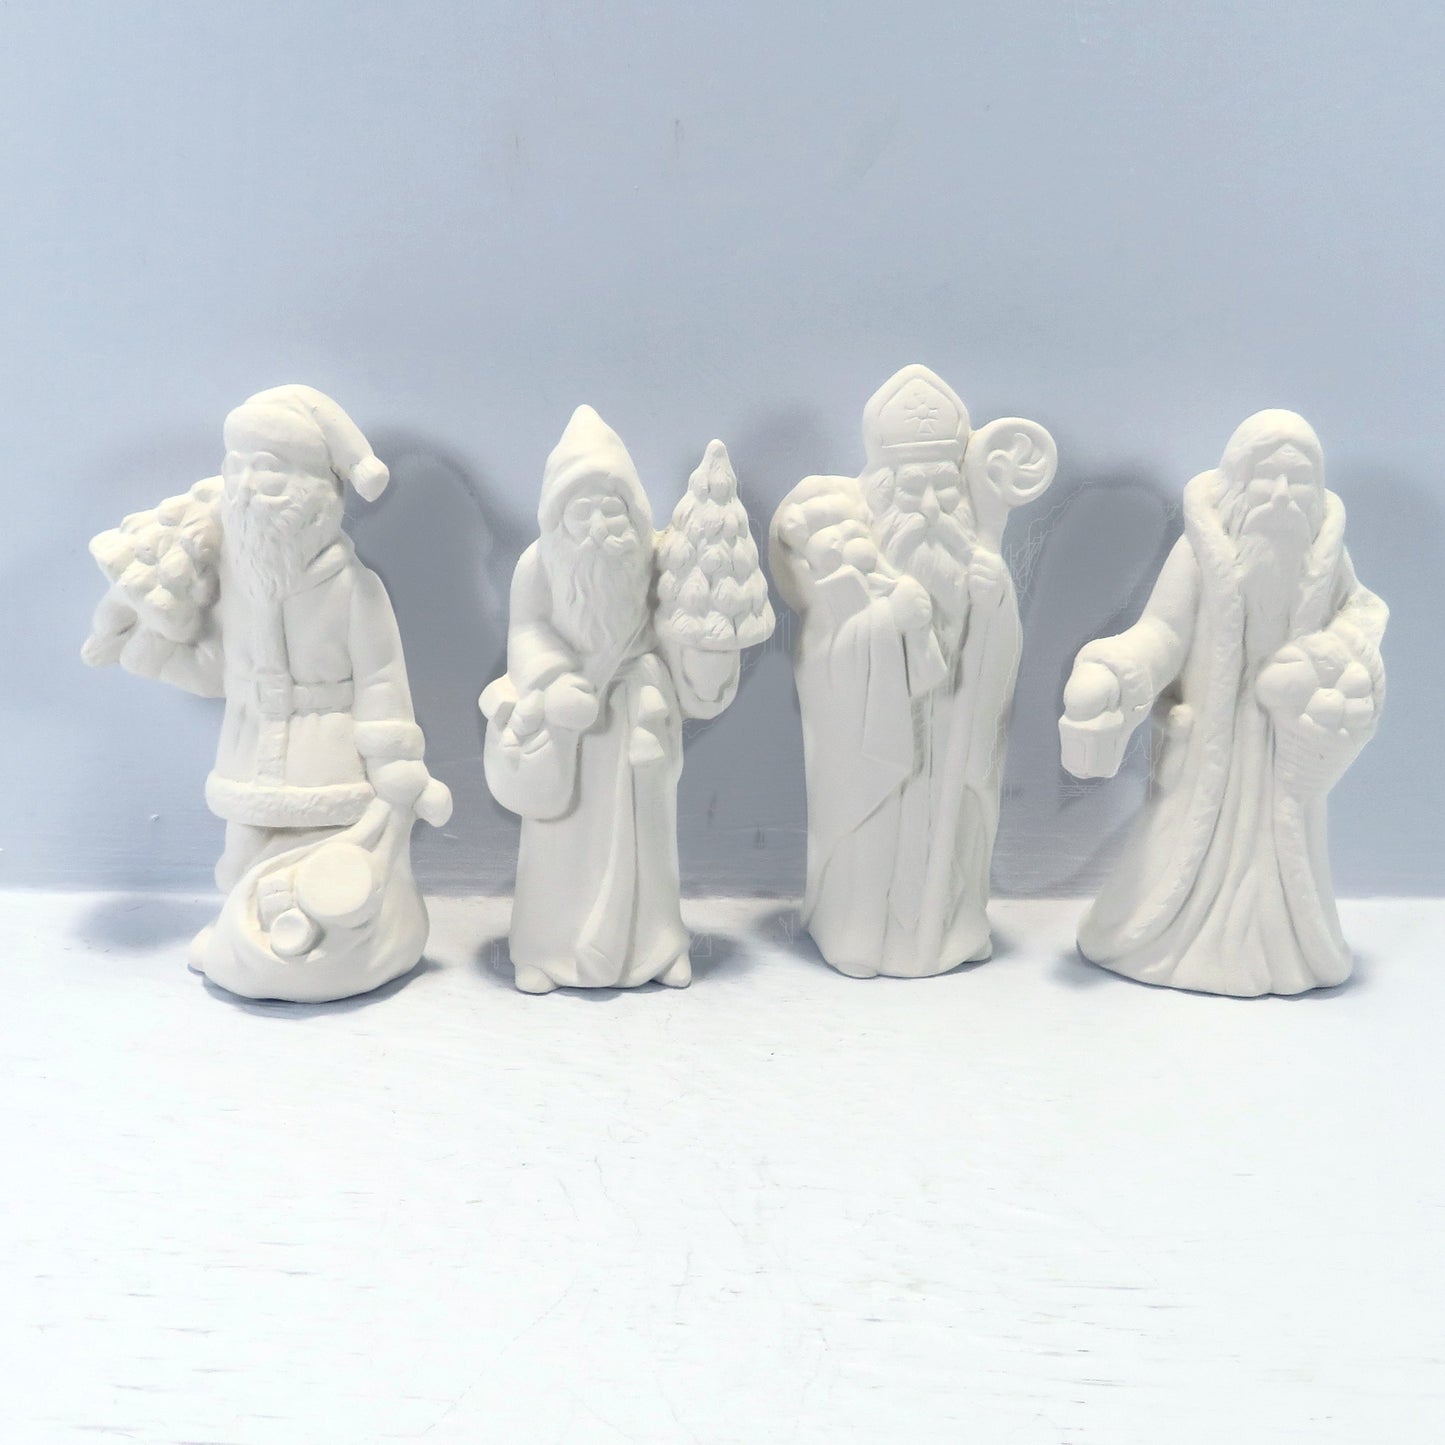 Set of 4 handmade ready to paint ceramic santa figurines on a pale blue surface. They are facing forward carrying various items